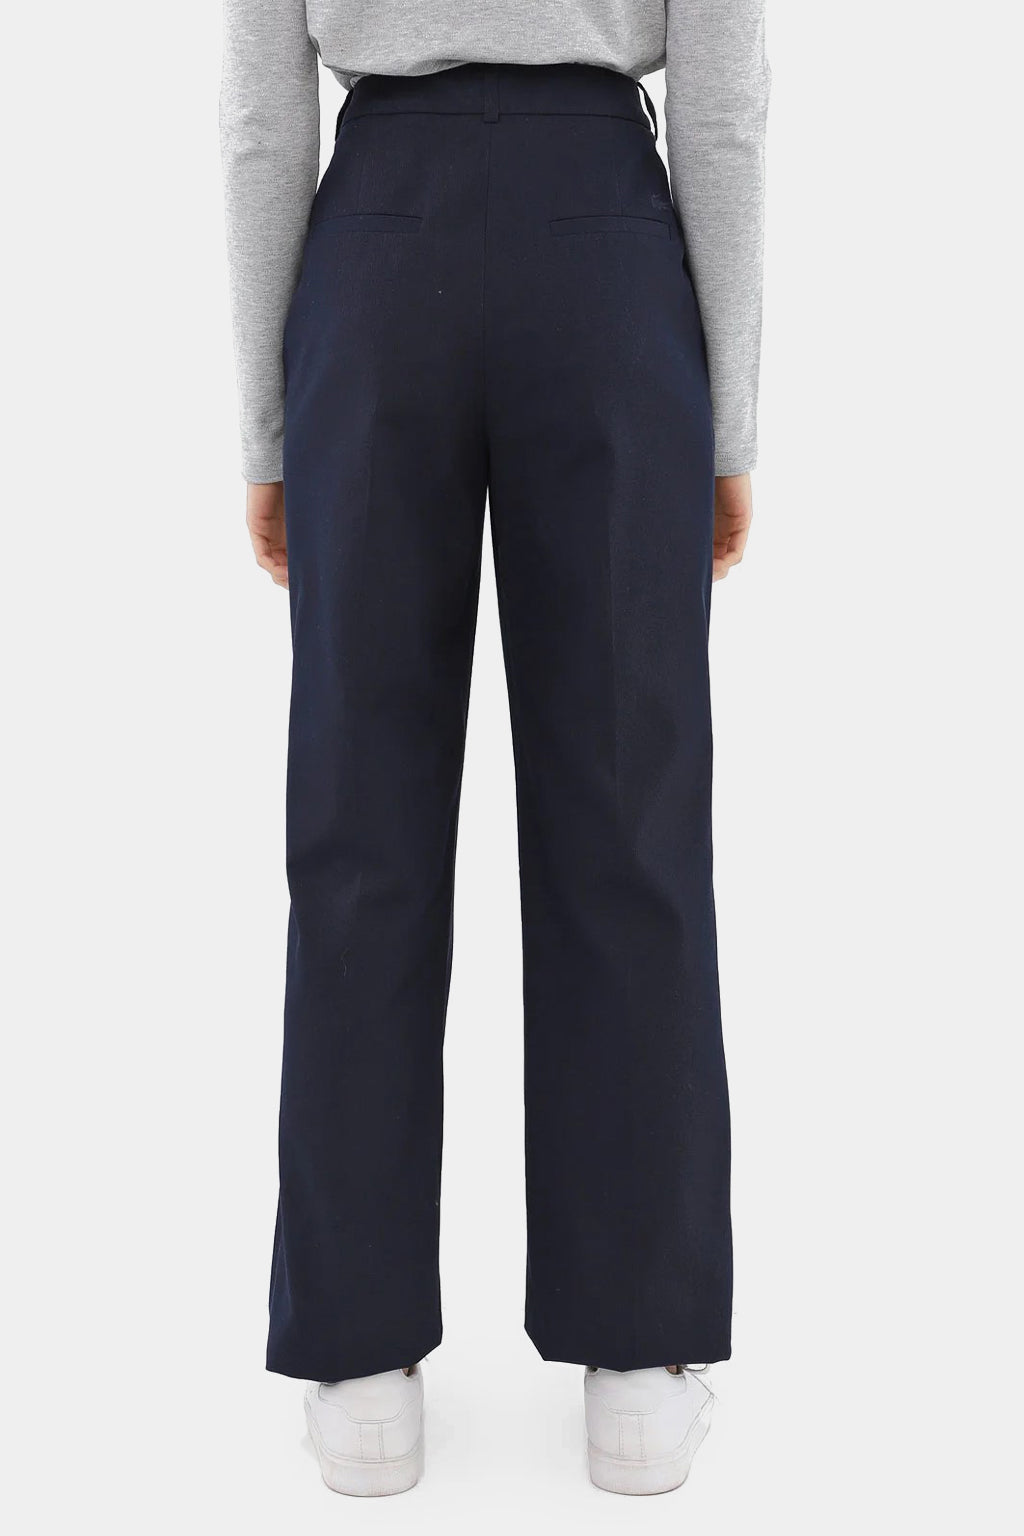 Lacoste - Chino Textured Navy Blue Pants